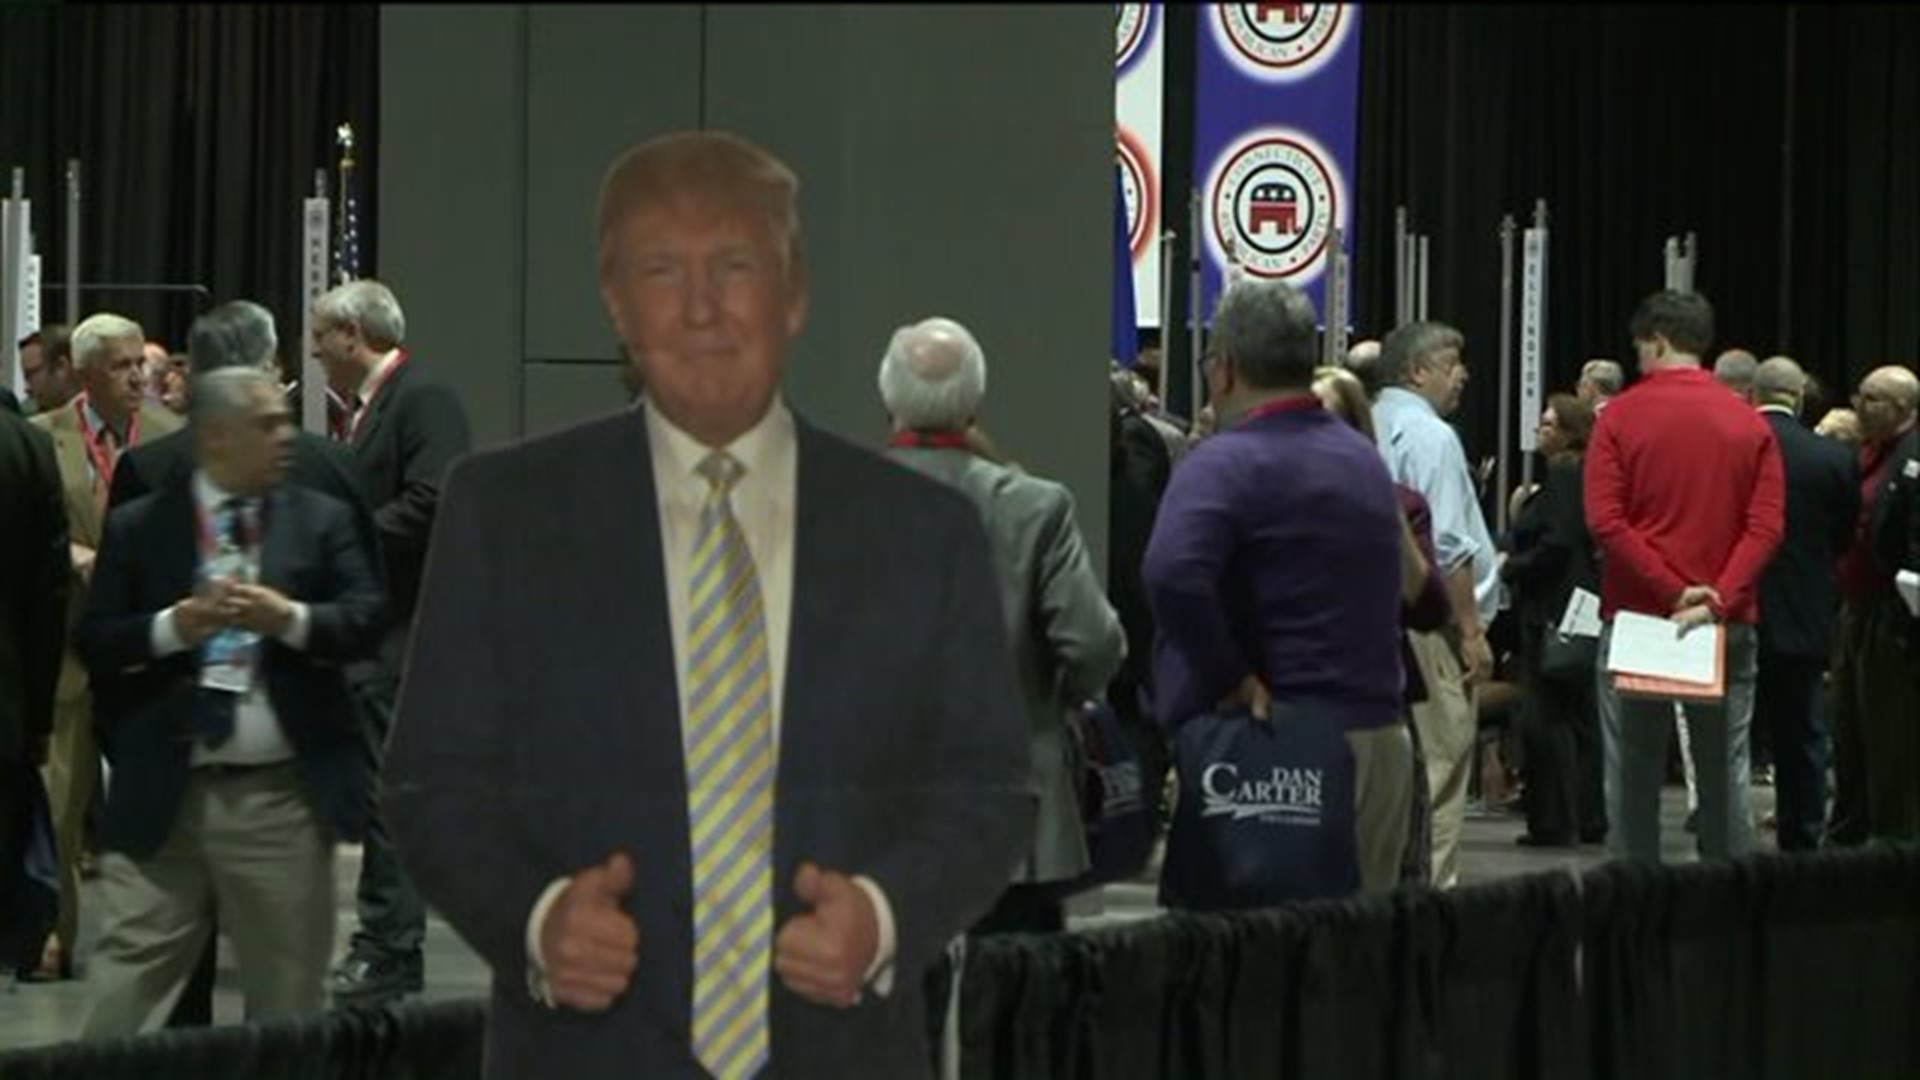 State Republican convention held to pick congressional candidates, declare support for Trump